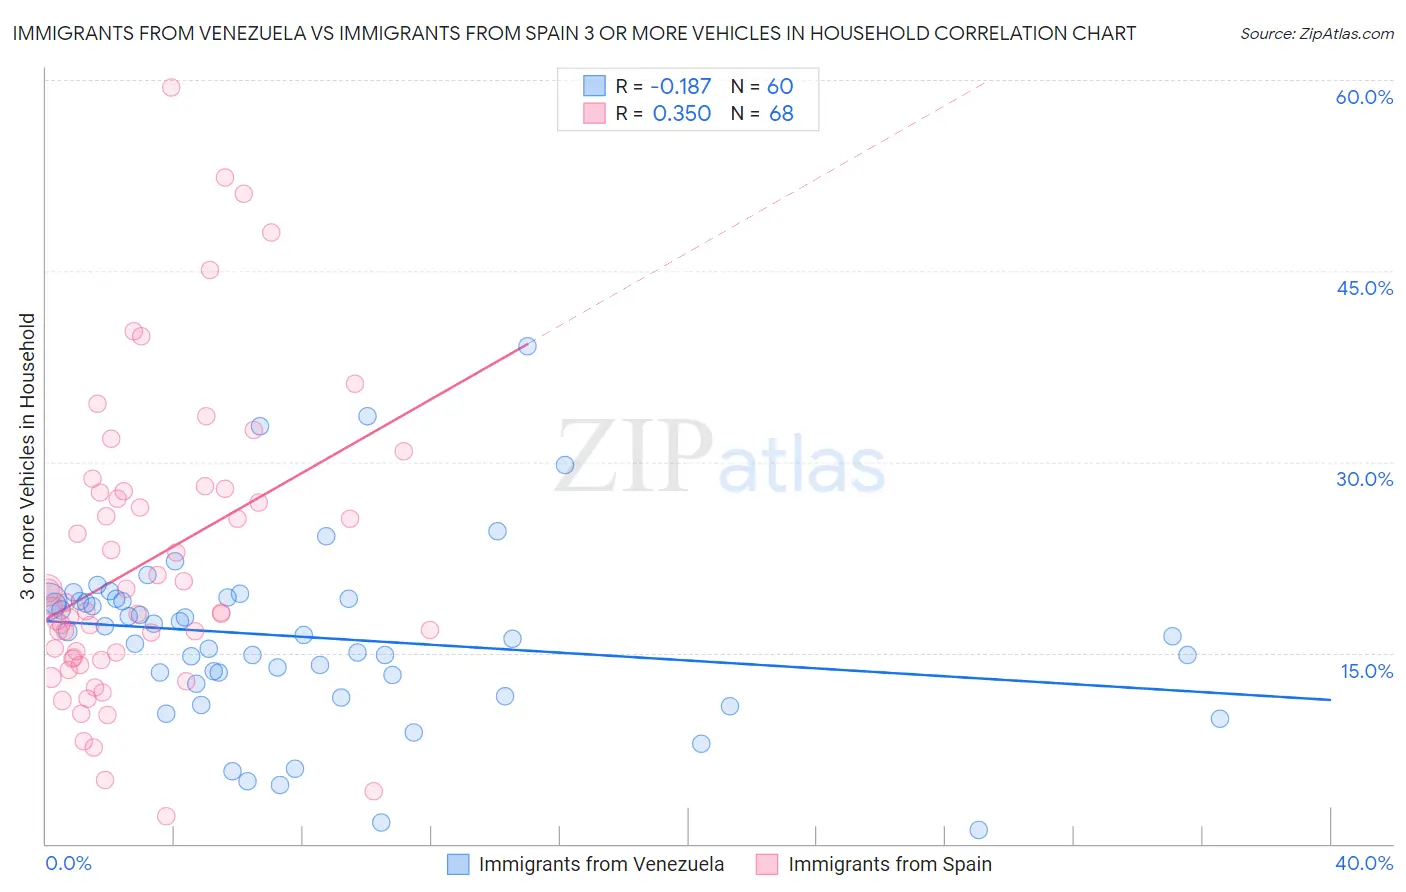 Immigrants from Venezuela vs Immigrants from Spain 3 or more Vehicles in Household